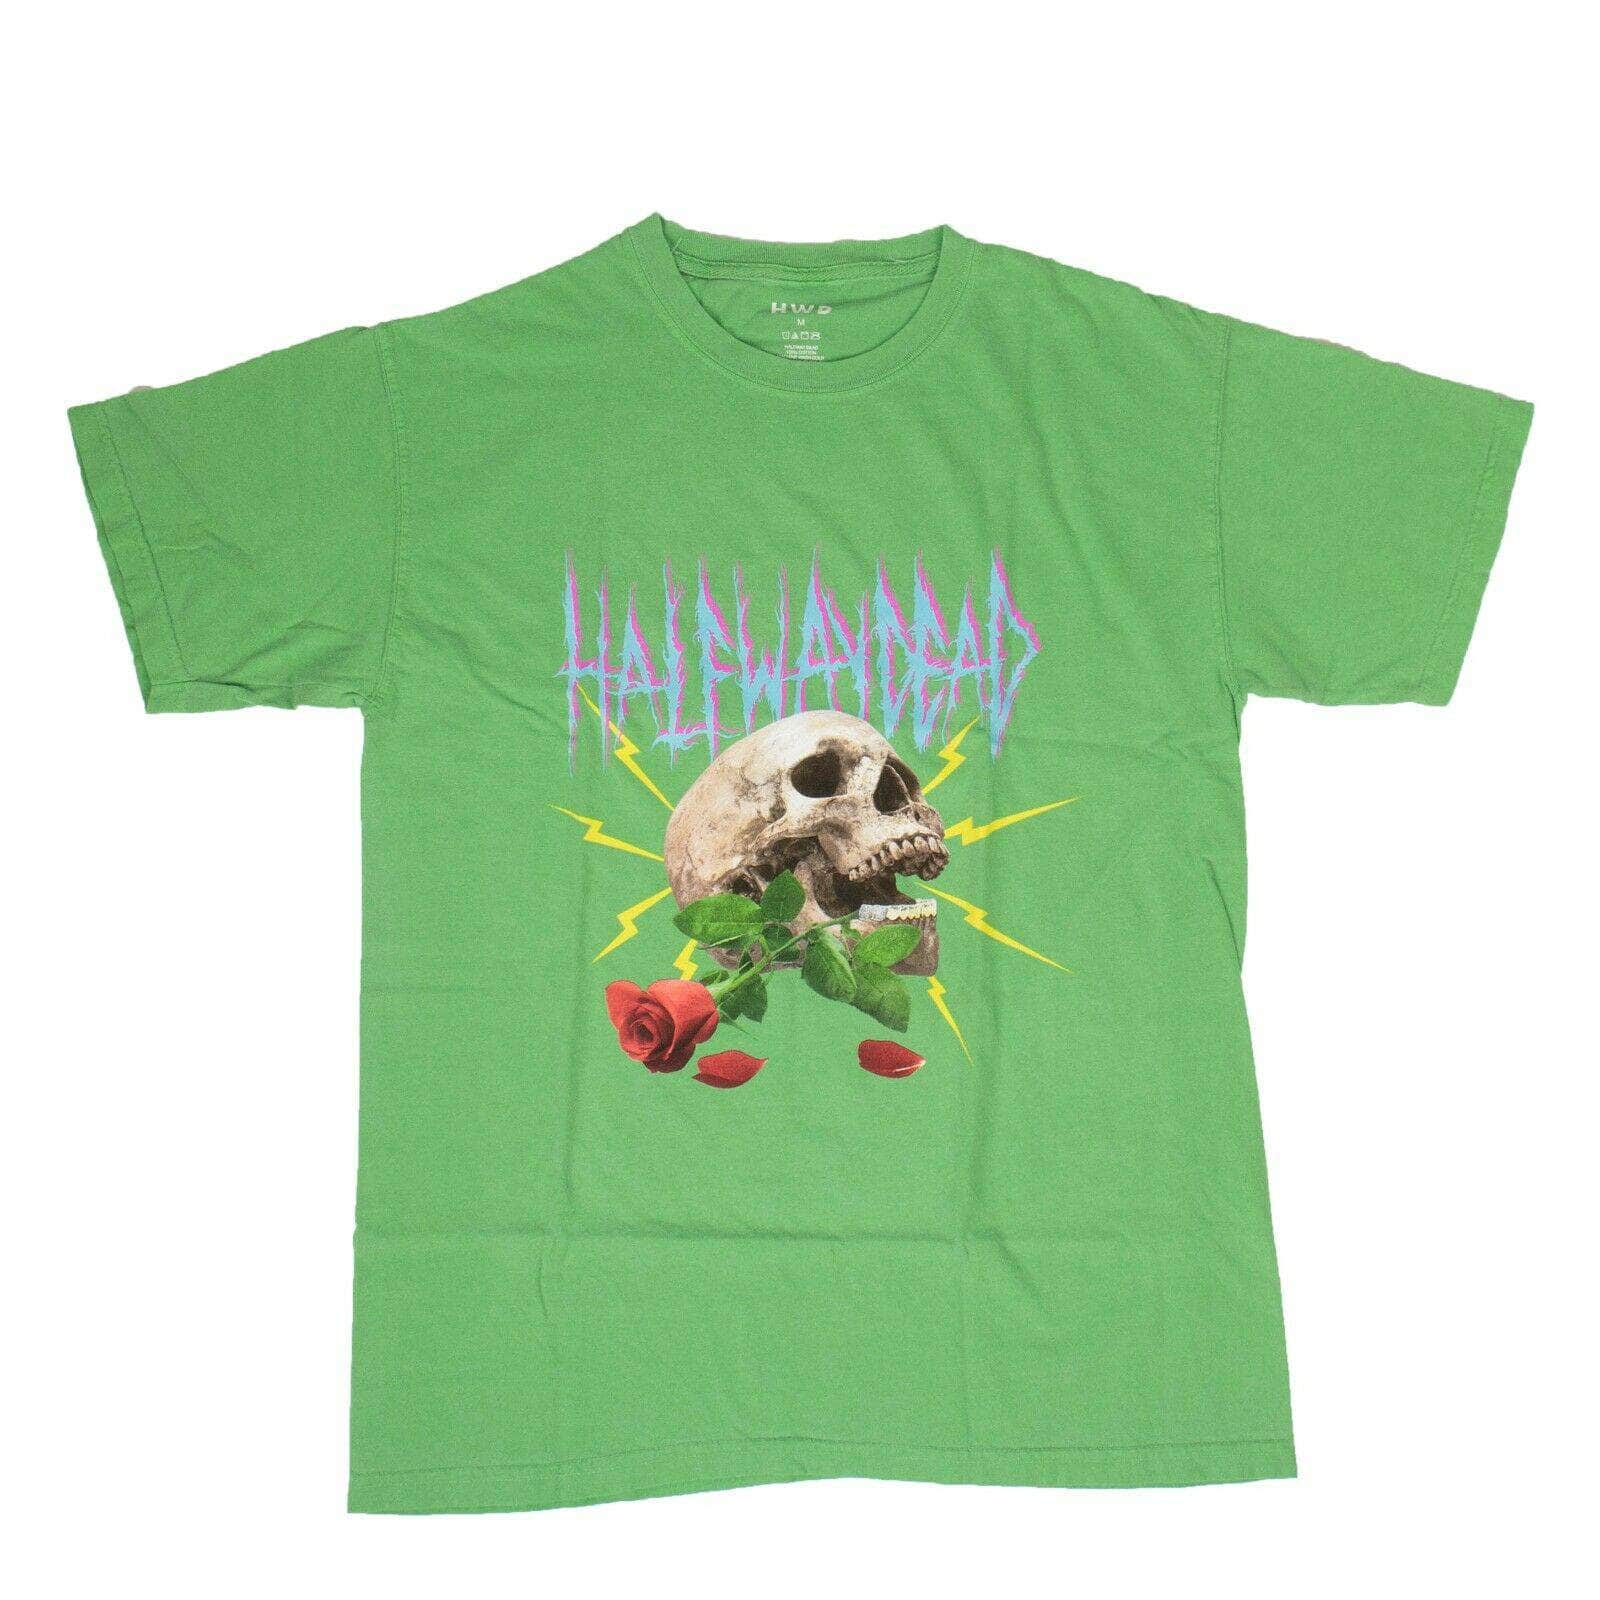 Halfway Dead channelenable-all, chicmi, couponcollection, gender-mens, halfway-dead, main-clothing, mens-shoes, size-xl, SPO, under-250 XL / B19HMPZ034 Green "Lightning Skull" Logo Short Sleeve T-shirt 80ST-HD-1002/XL 80ST-HD-1002/XL